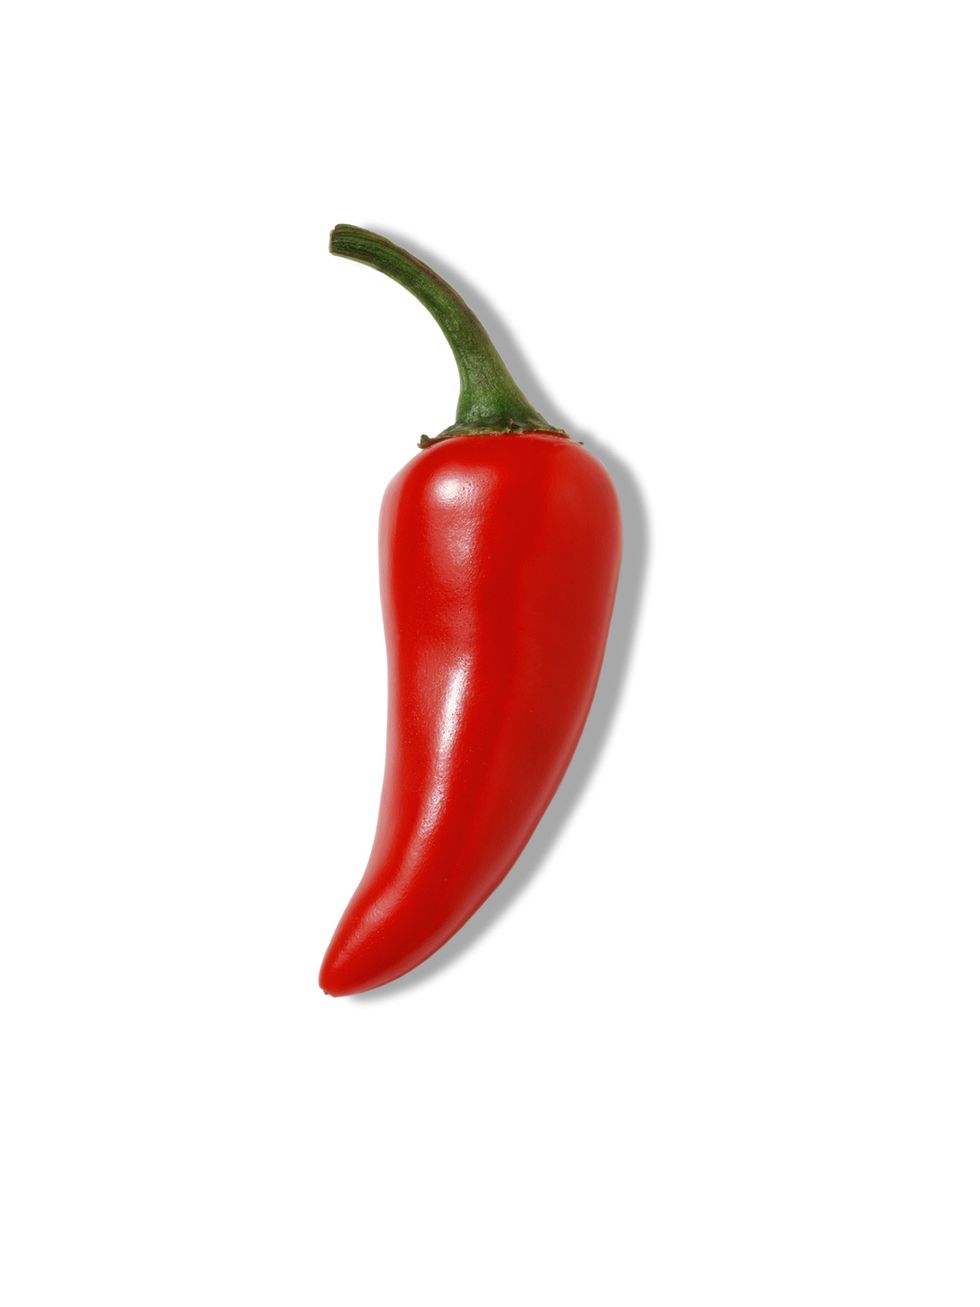 Vegetable, Ingredient, Produce, Natural foods, Spice, Bell peppers and chili peppers, Food, Whole food, Chili pepper, Carmine, 